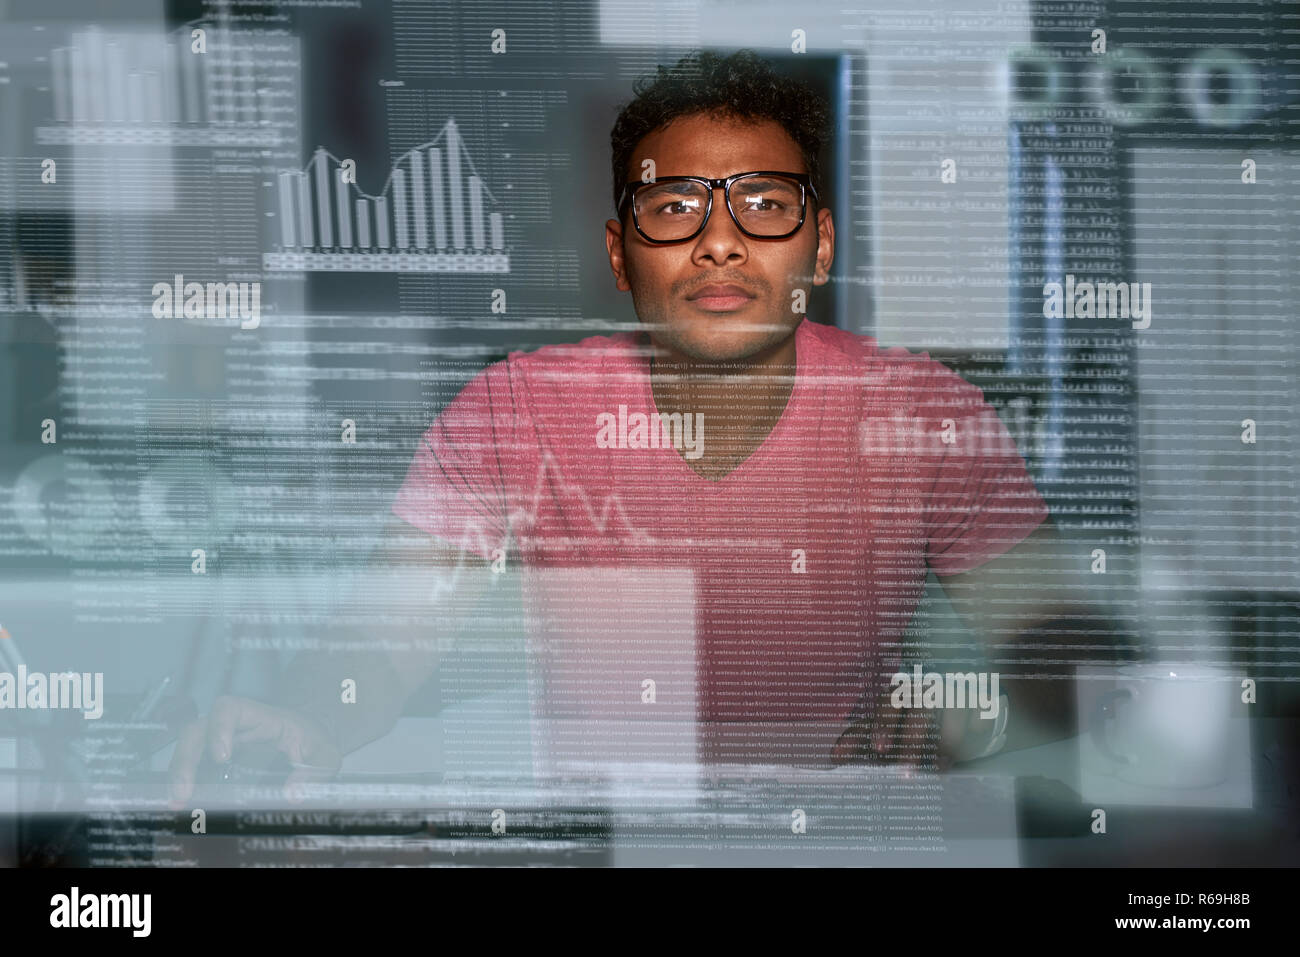 Young spectacled concentrated indian big data developer Stock Photo